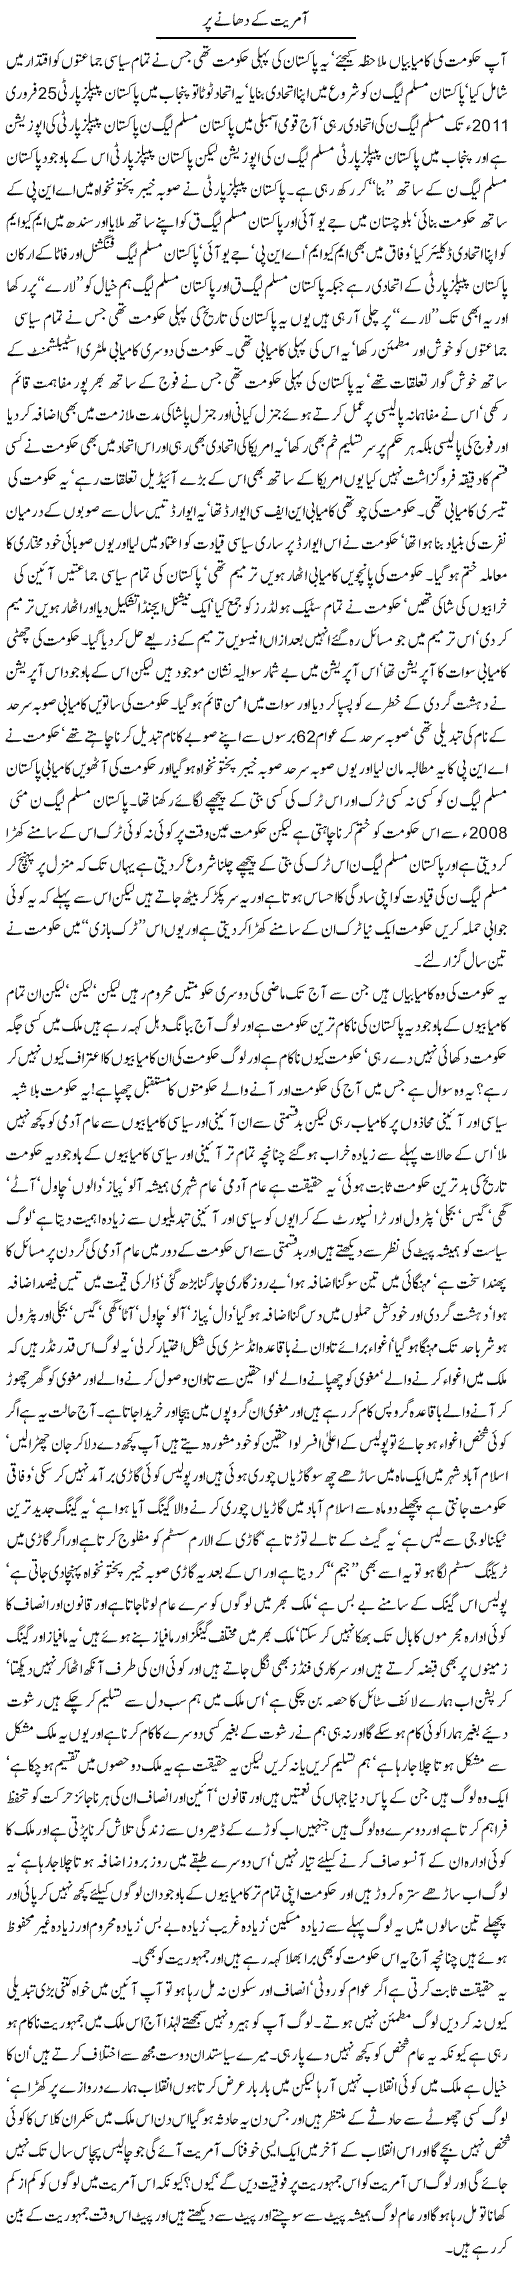 Near Army Dictatorship Express Column Javed Chaudhry 8 March 2011